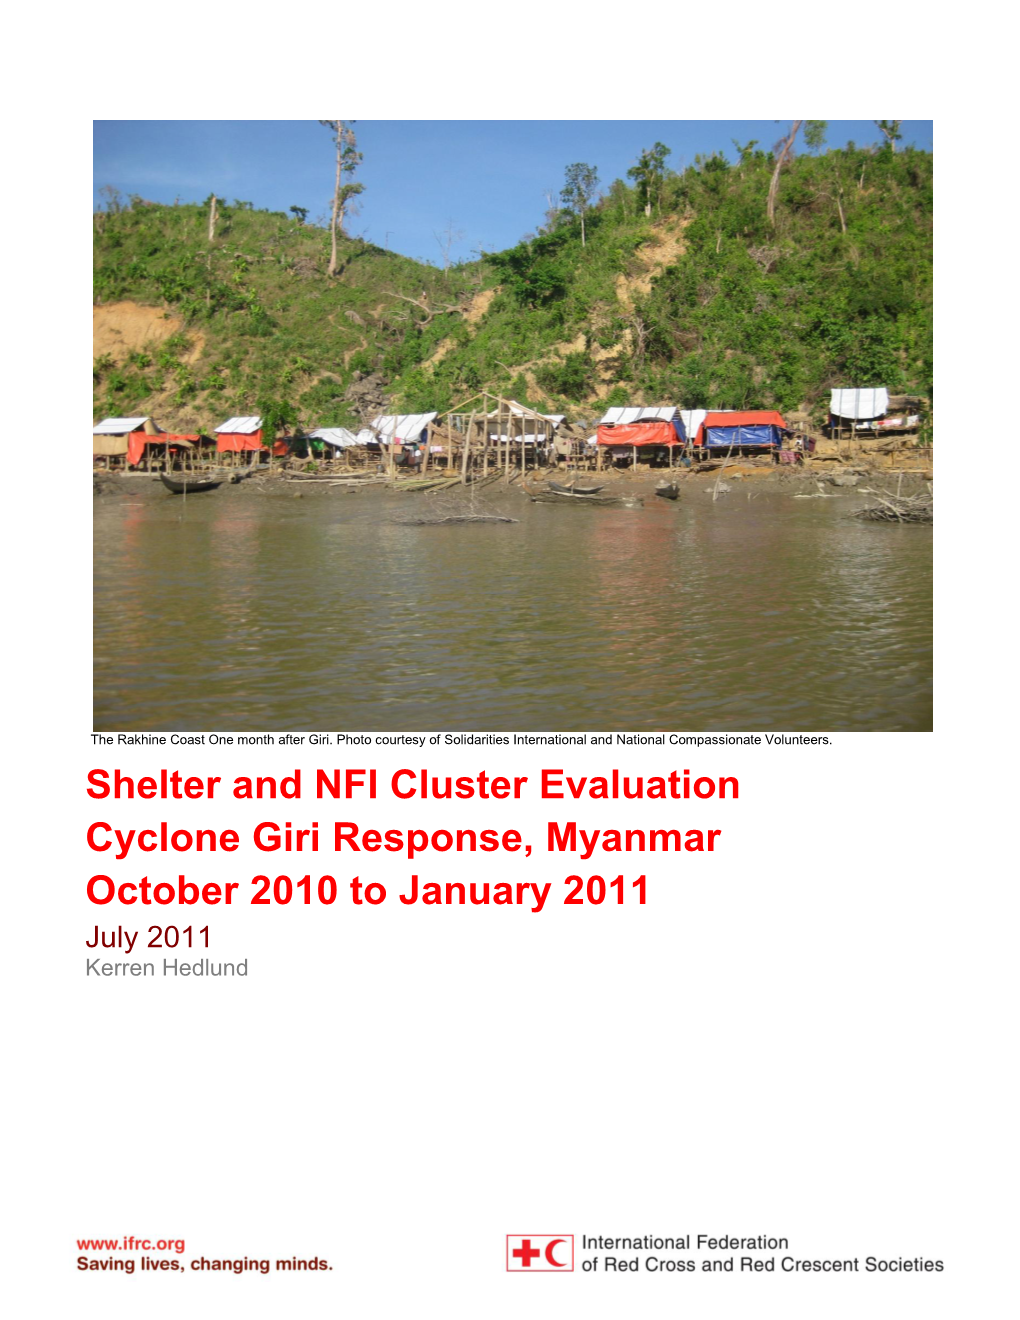 Shelter and NFI Cluster Evaluation Cyclone Giri Response, Myanmar October 2010 to January 2011 July 2011 Kerren Hedlund